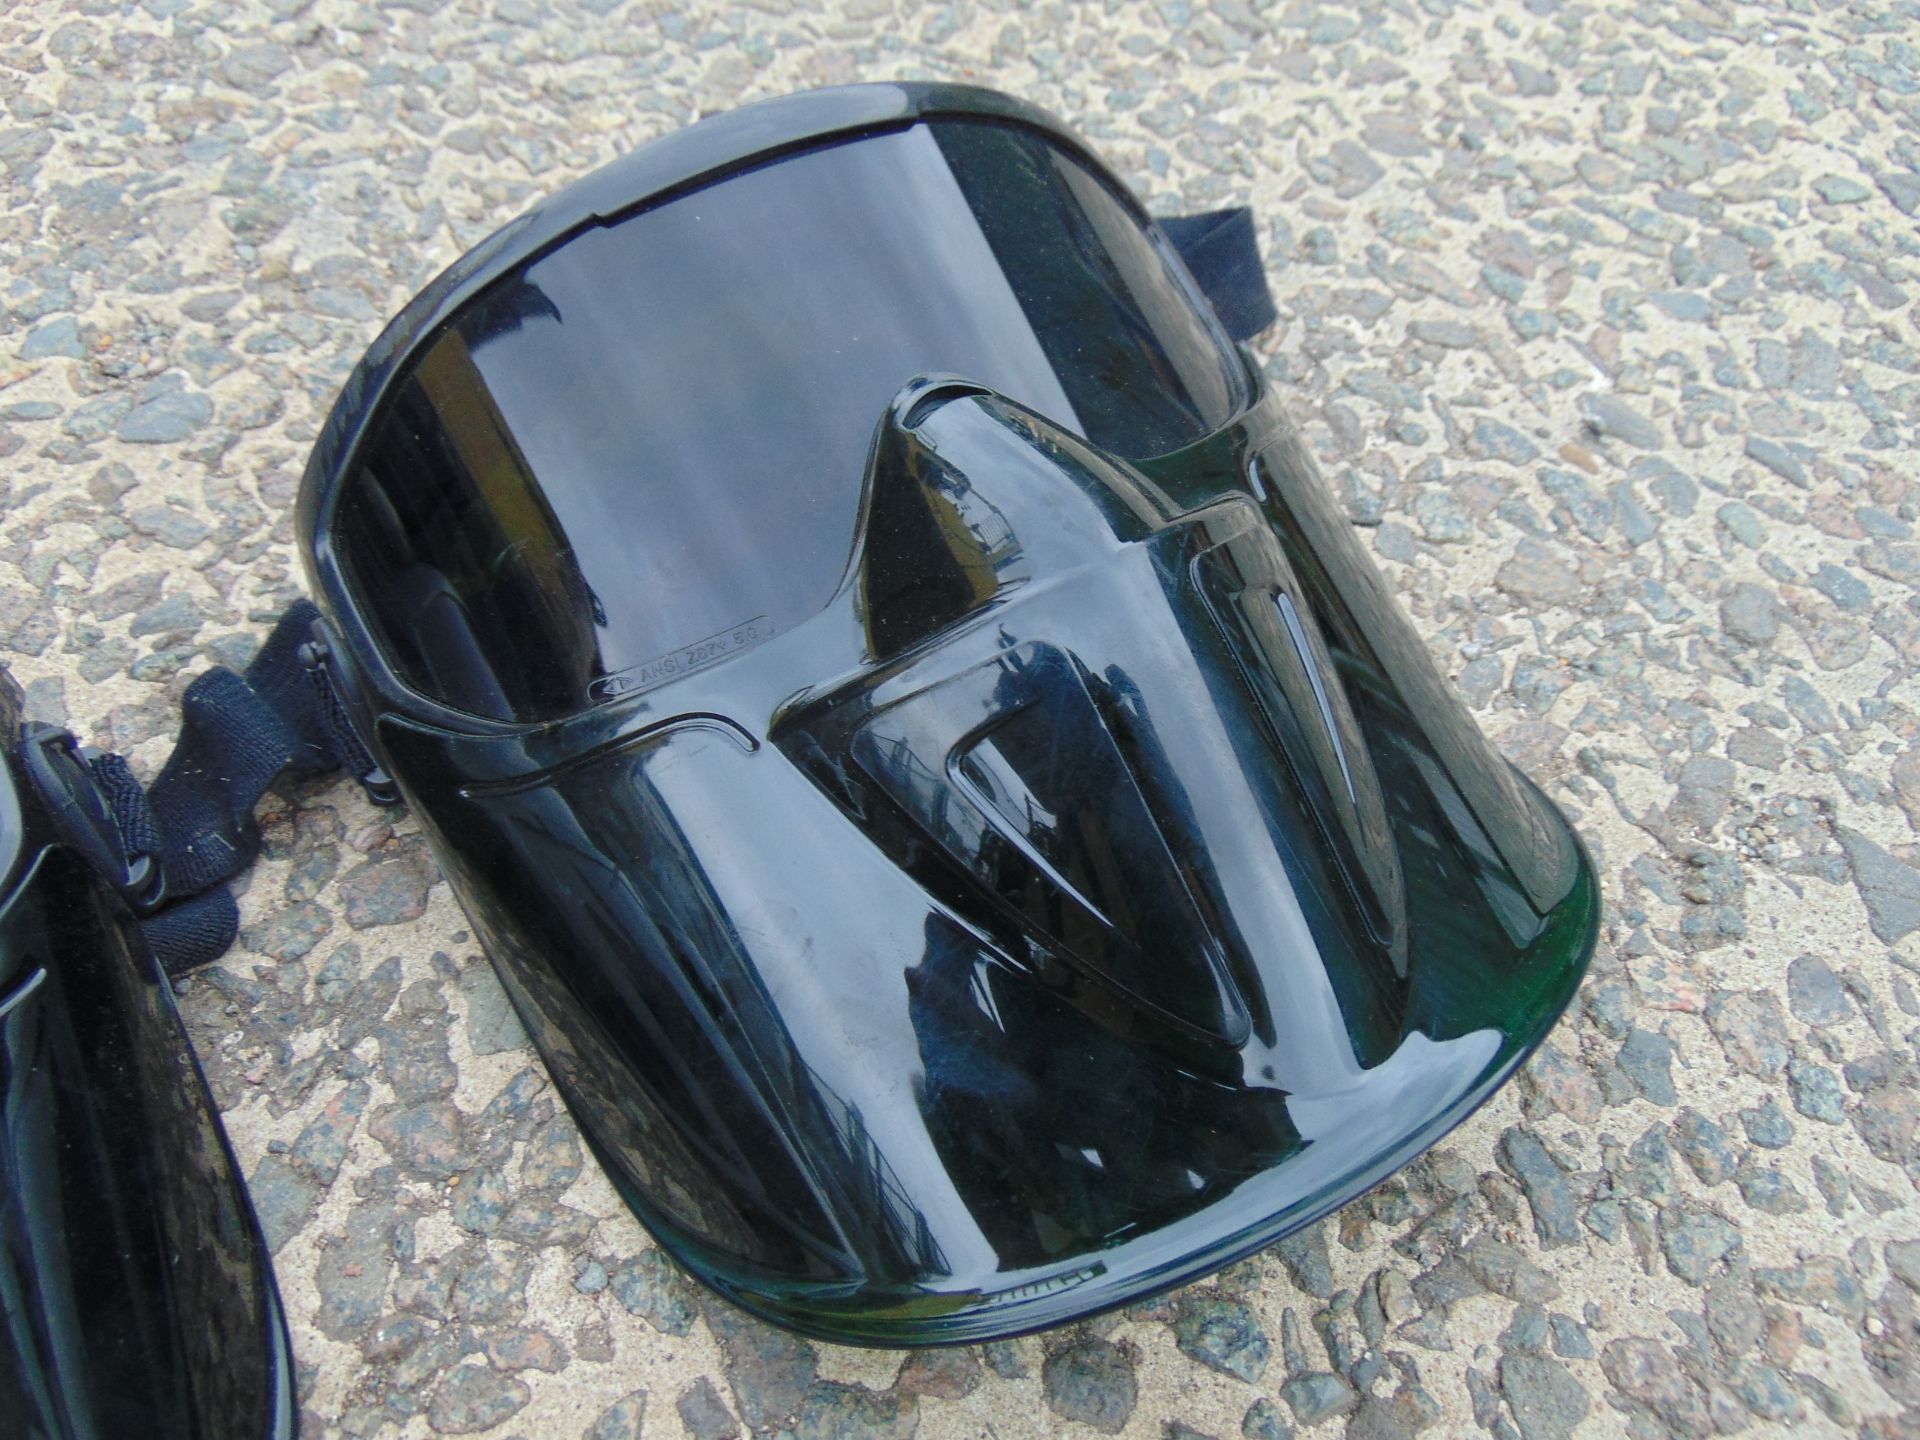 2 x Monogoggle XTR Safety Goggles C/W Face Shields - Image 3 of 6